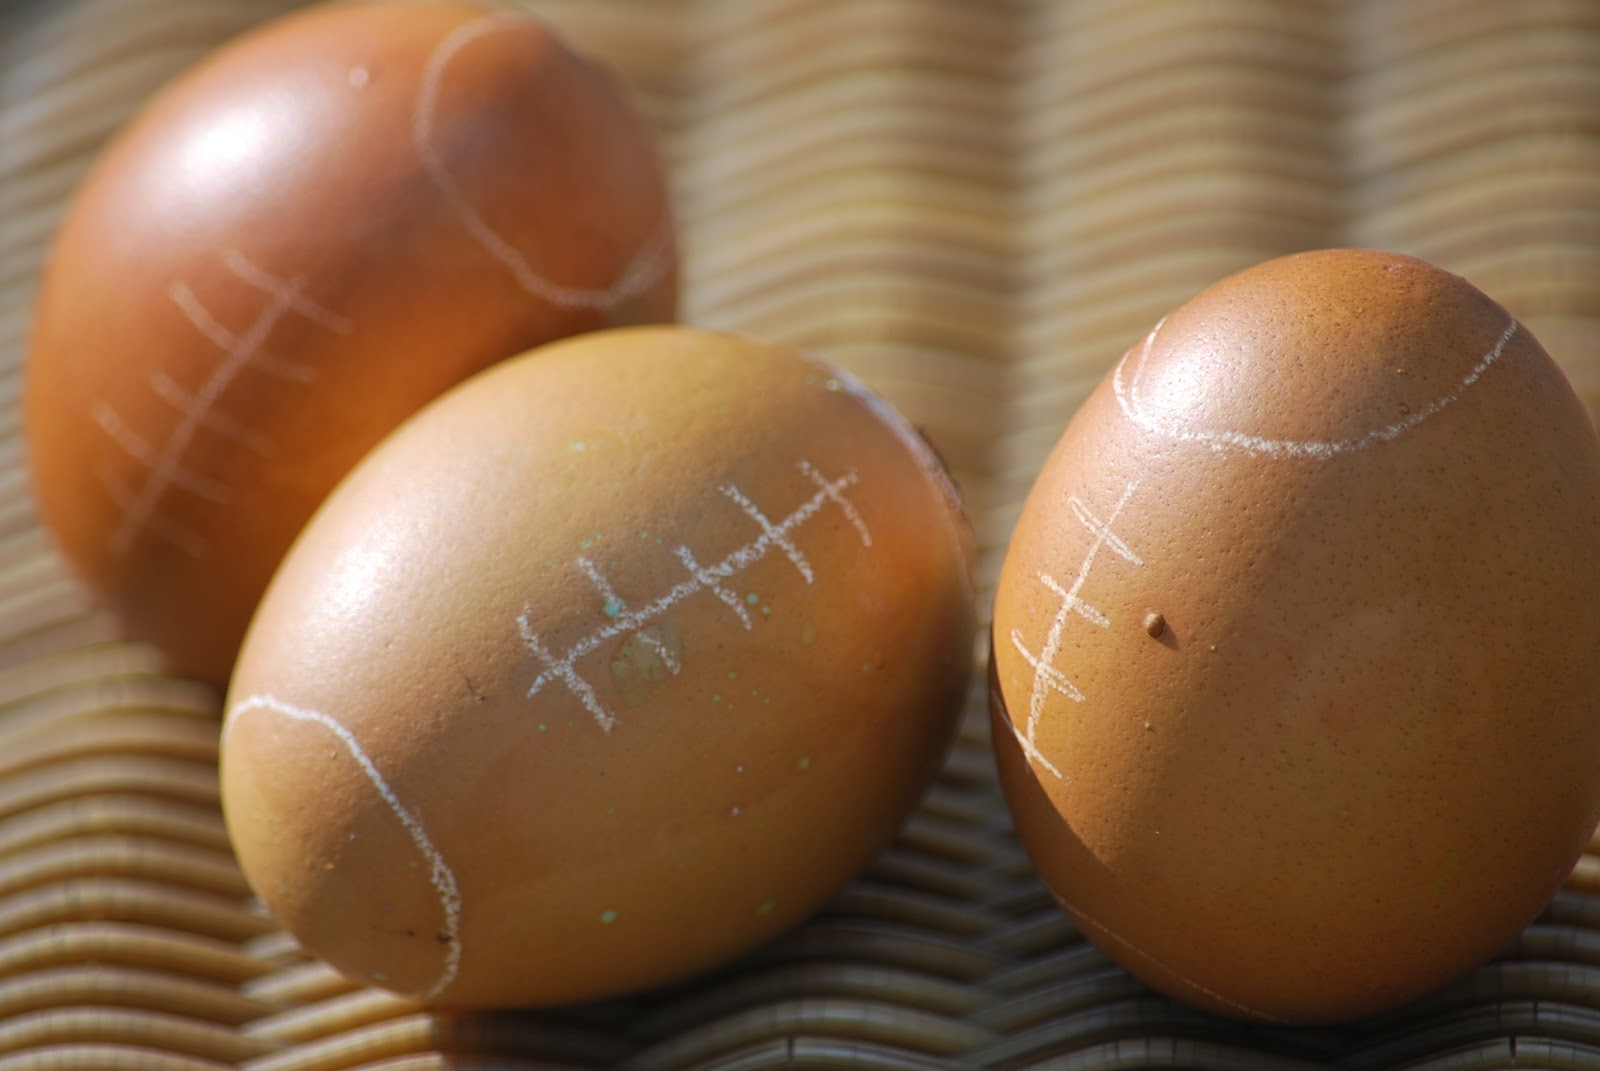 My story in recipes: Football Egg Cupcakes